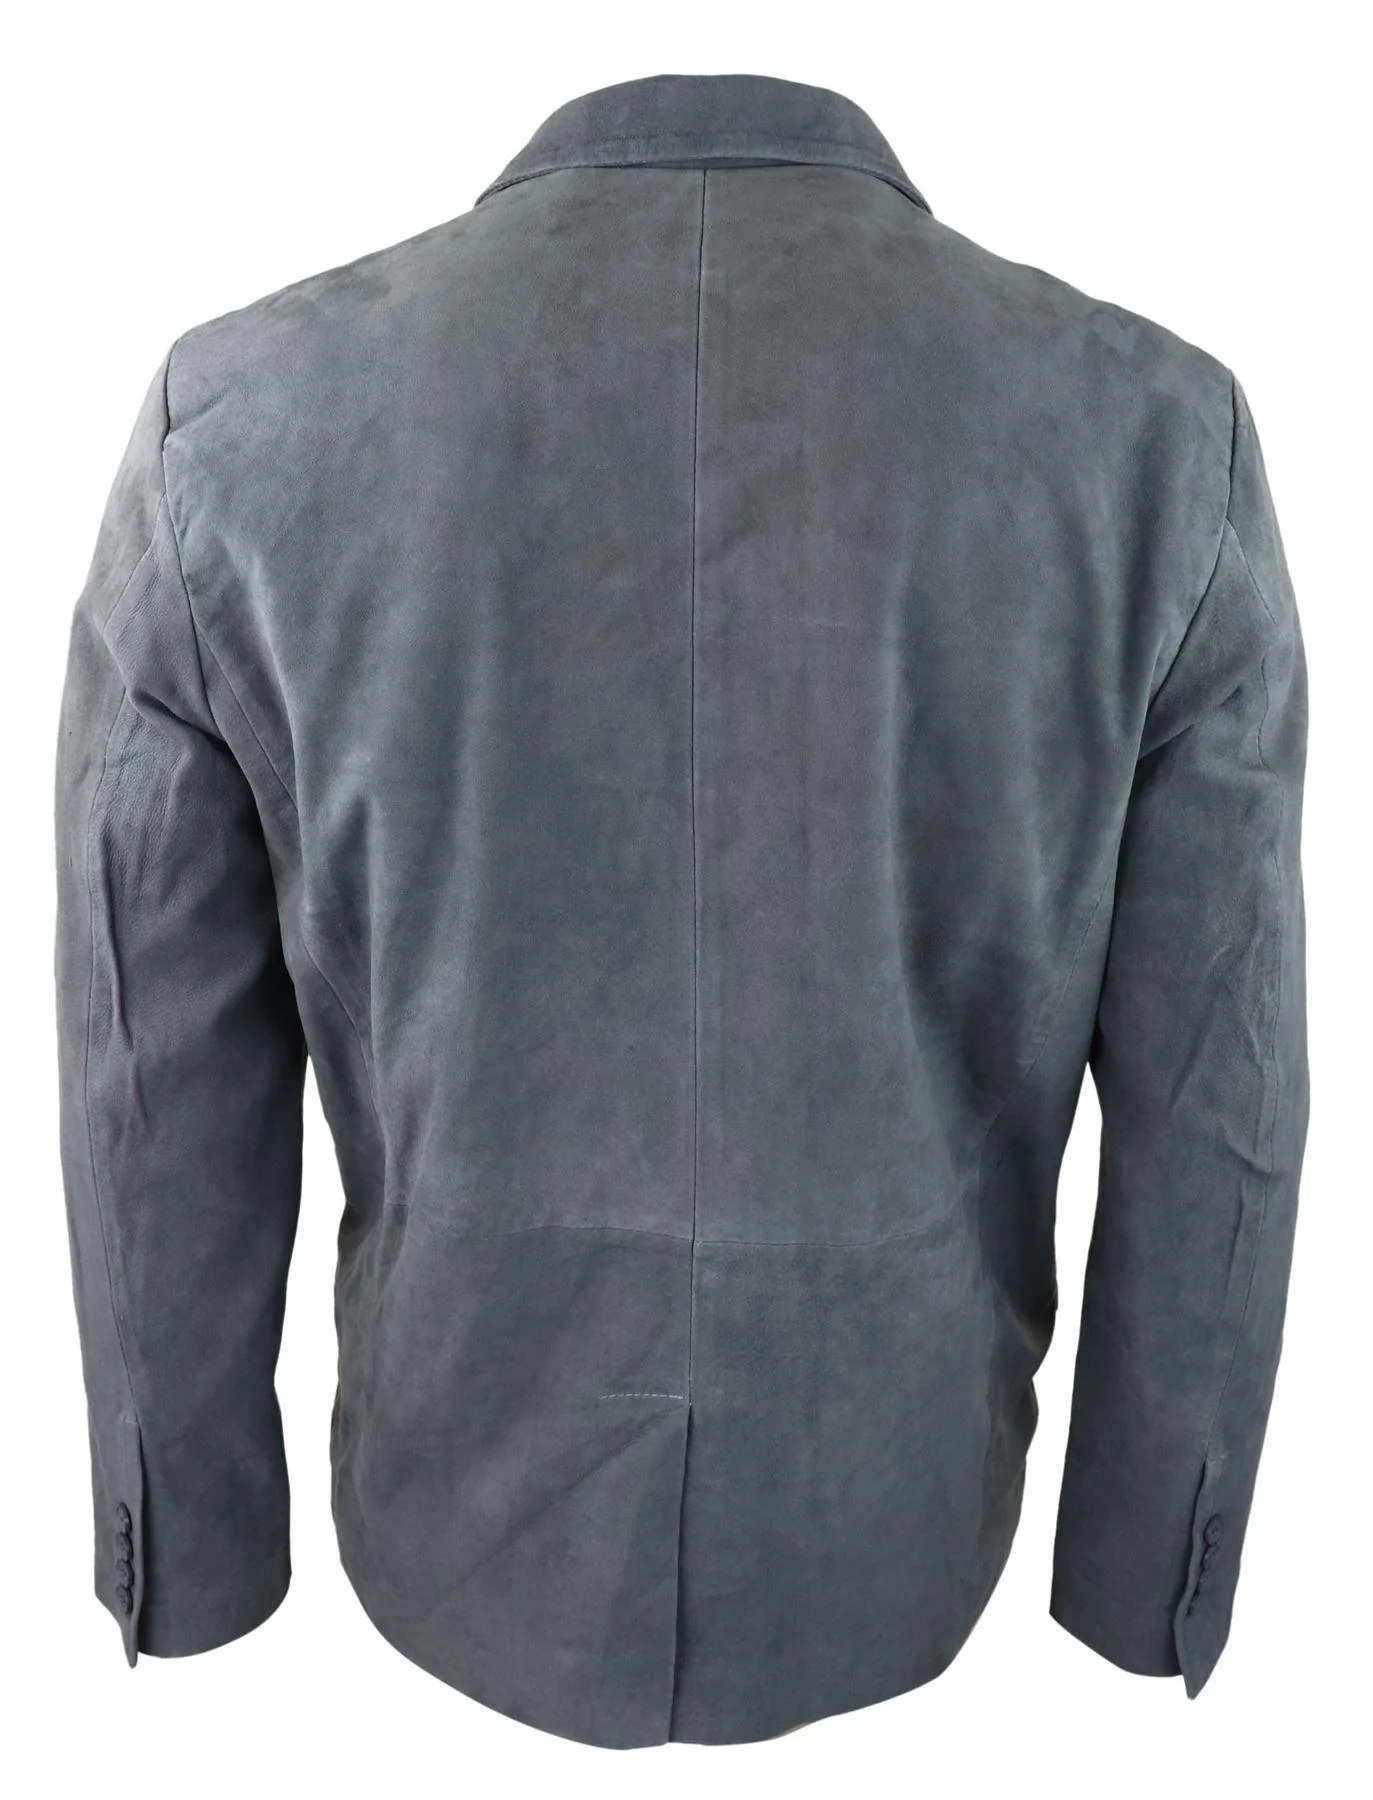 Mens Genuine Suede Blazer Style Jacket Leather Mens Classic VIntage Smart Casual Grey